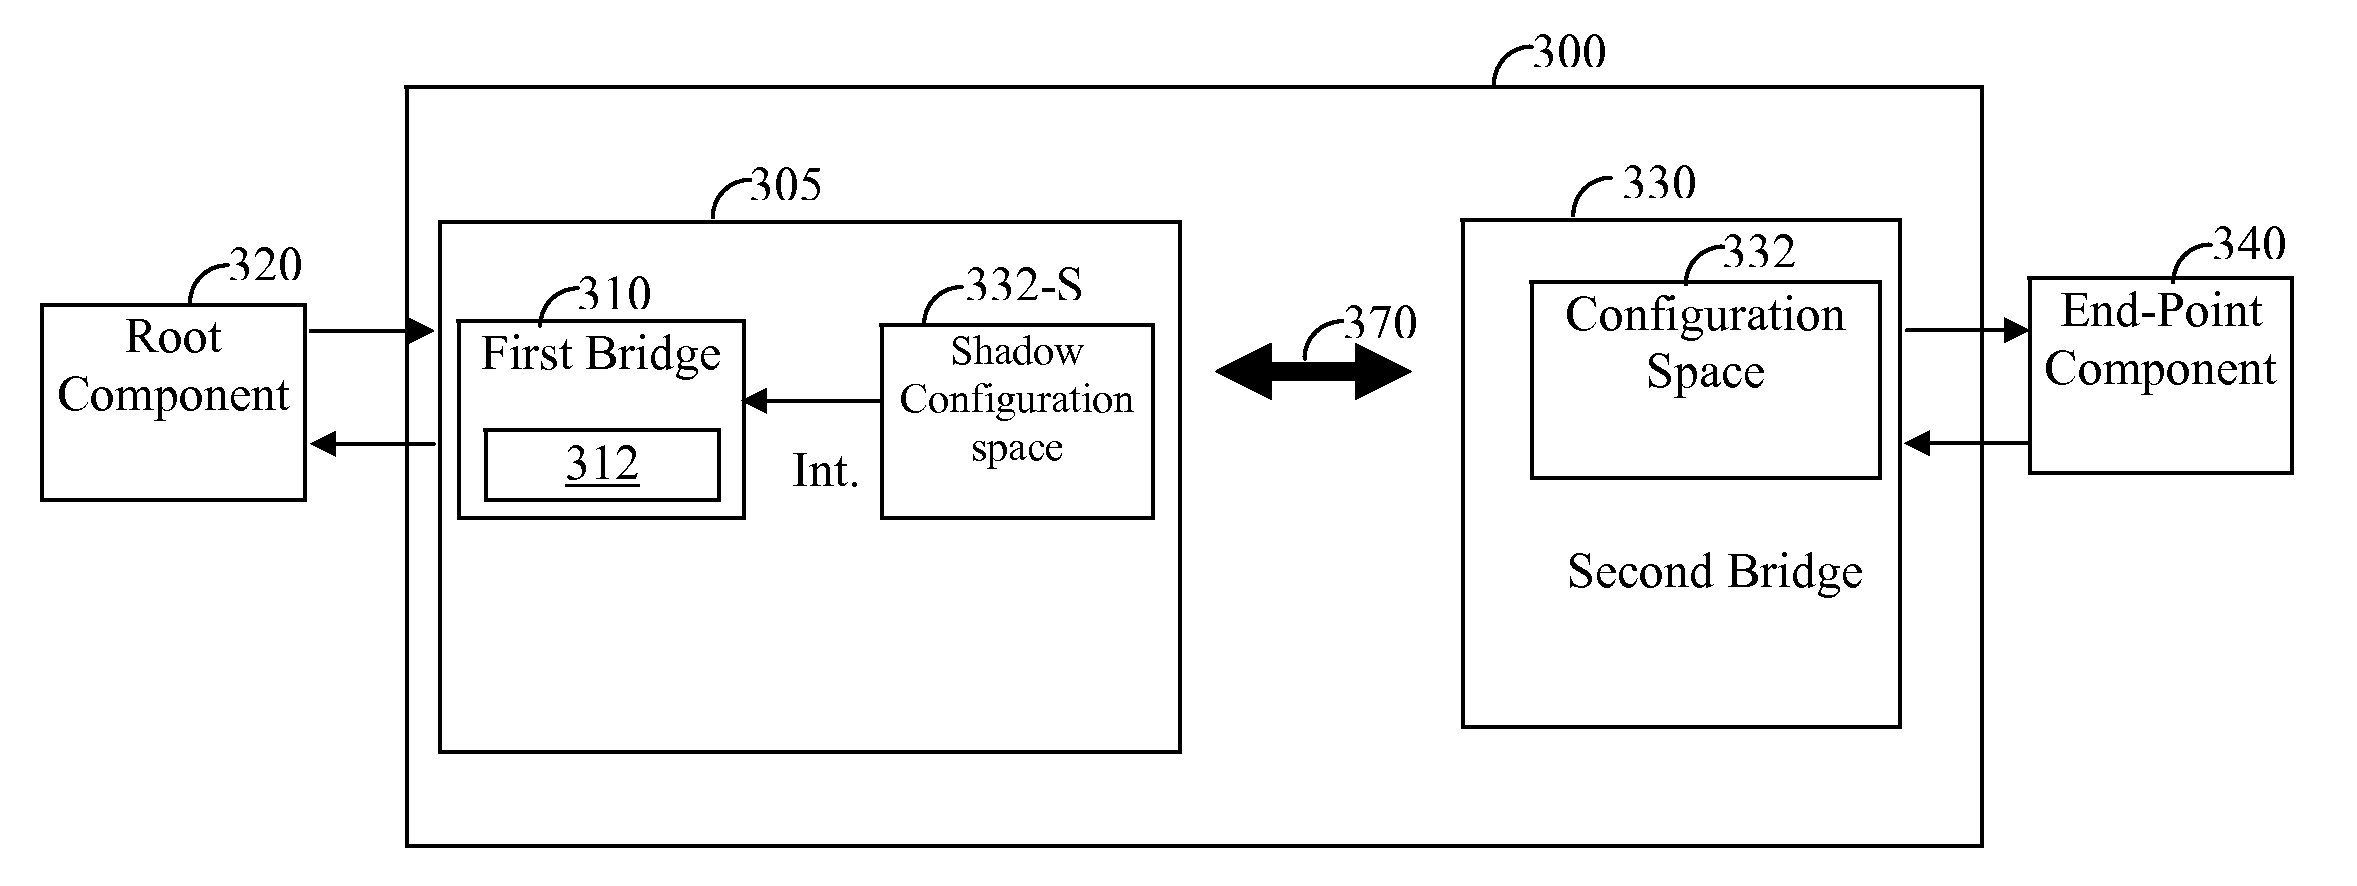 Hot plug process in a distributed interconnect bus